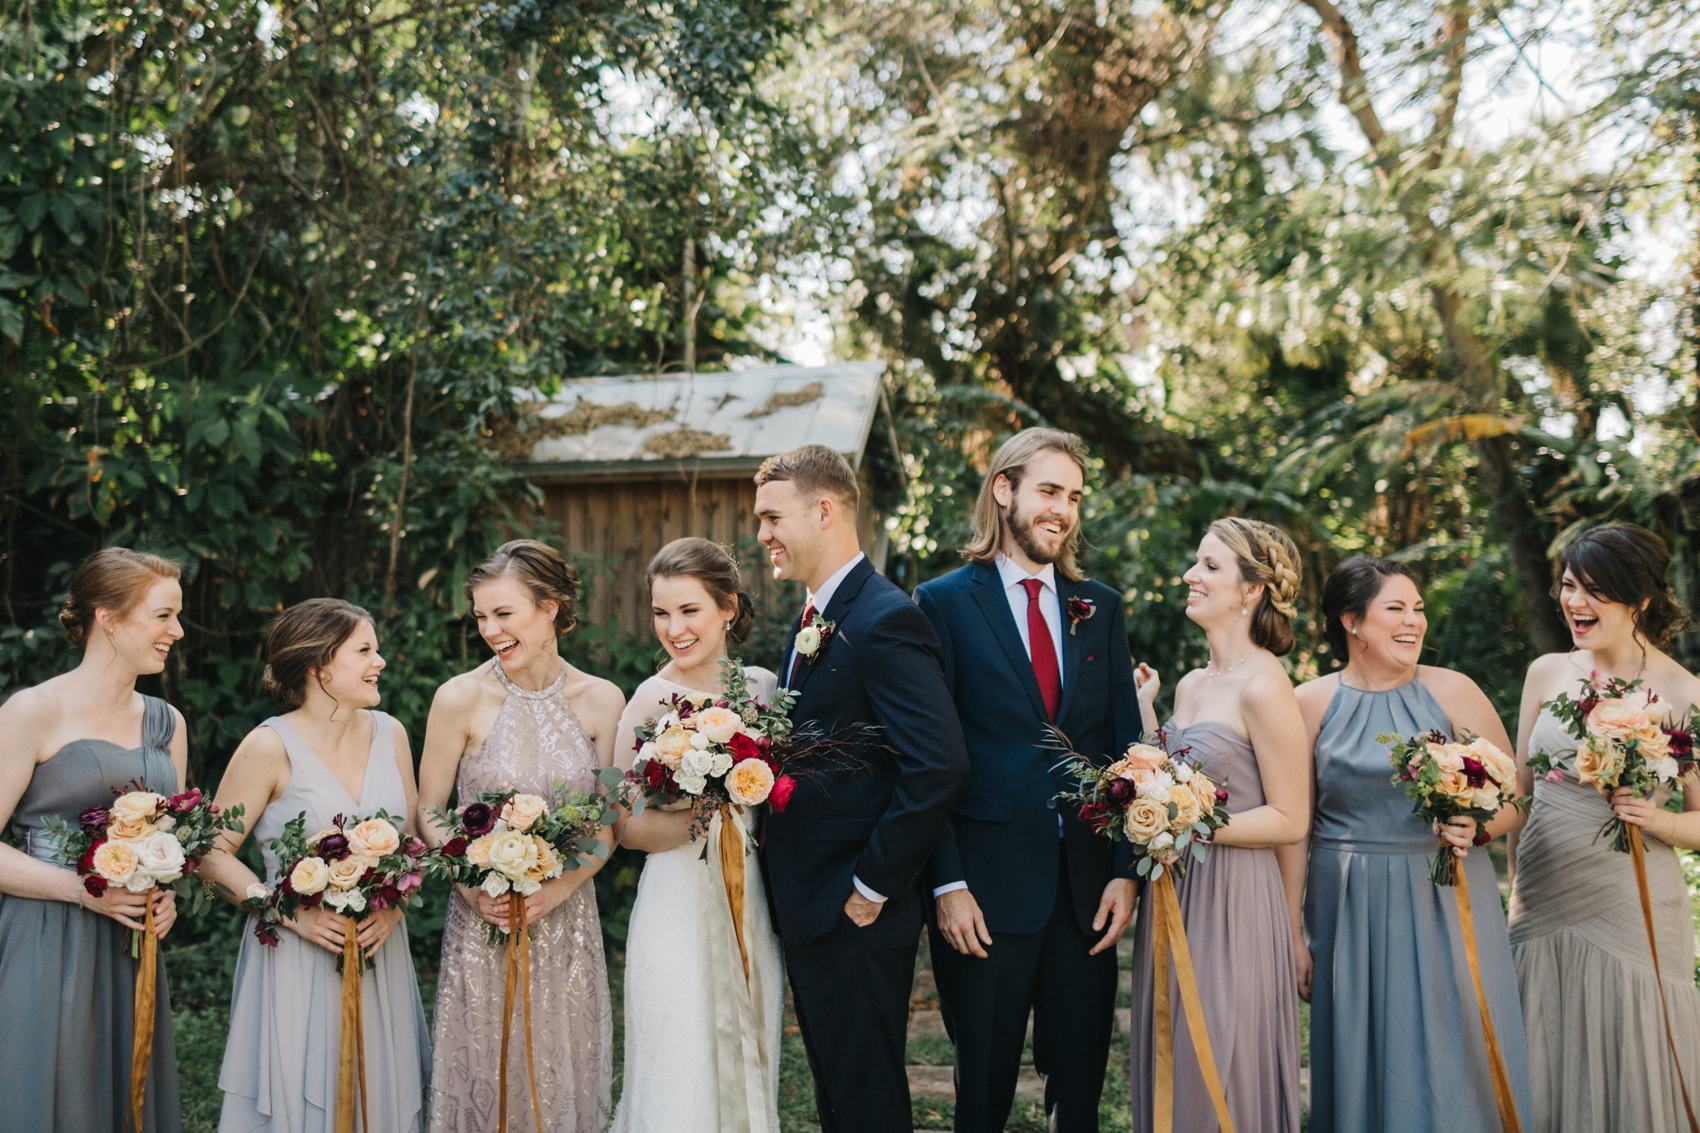 Candid bridal party photos before the ceremony by Orlando wedding photographer